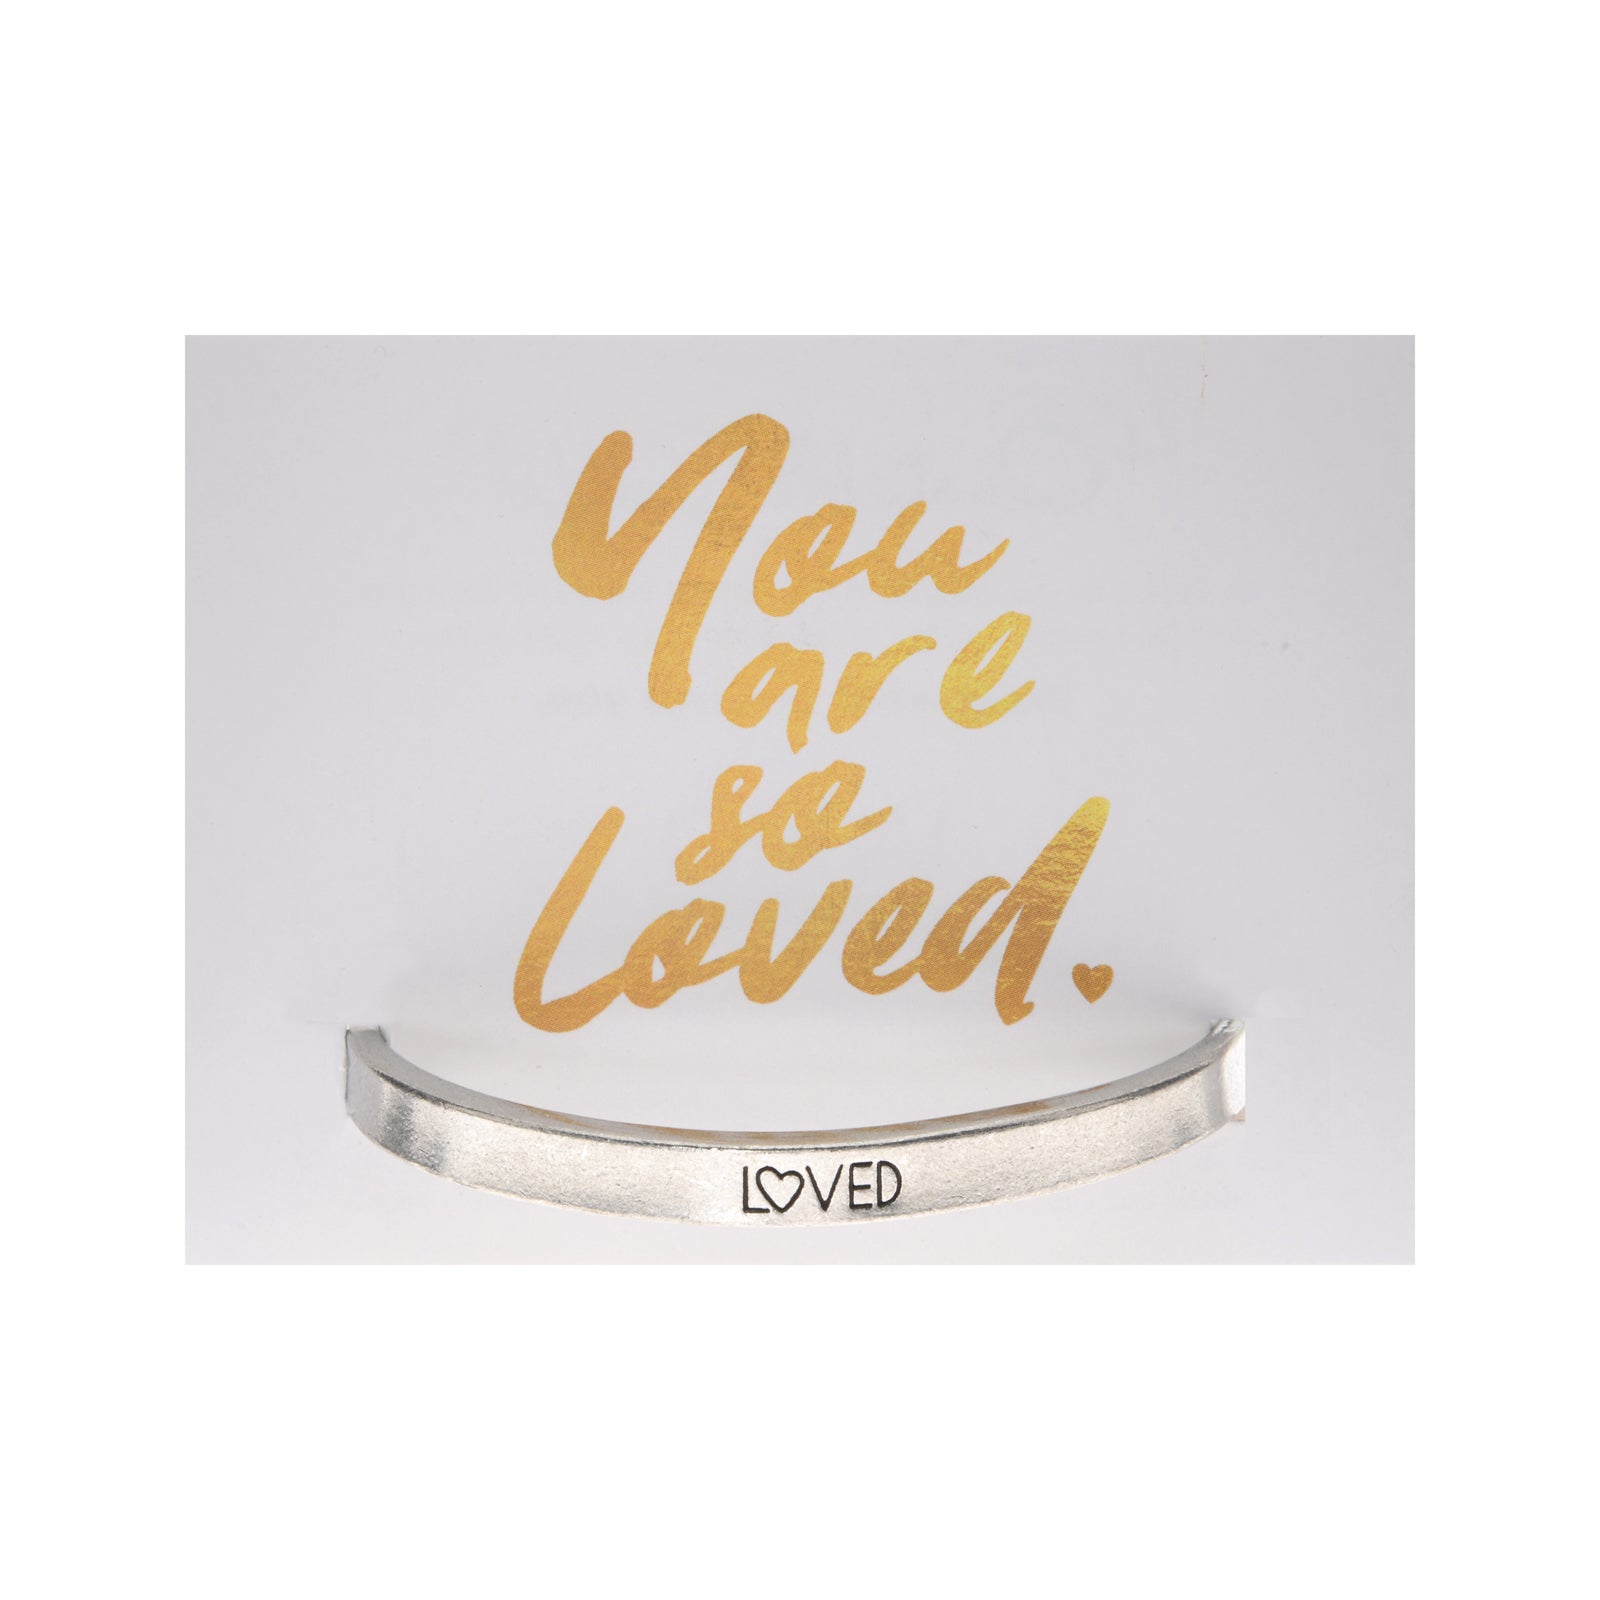 Loved Quotable Cuff Bracelet on backer card